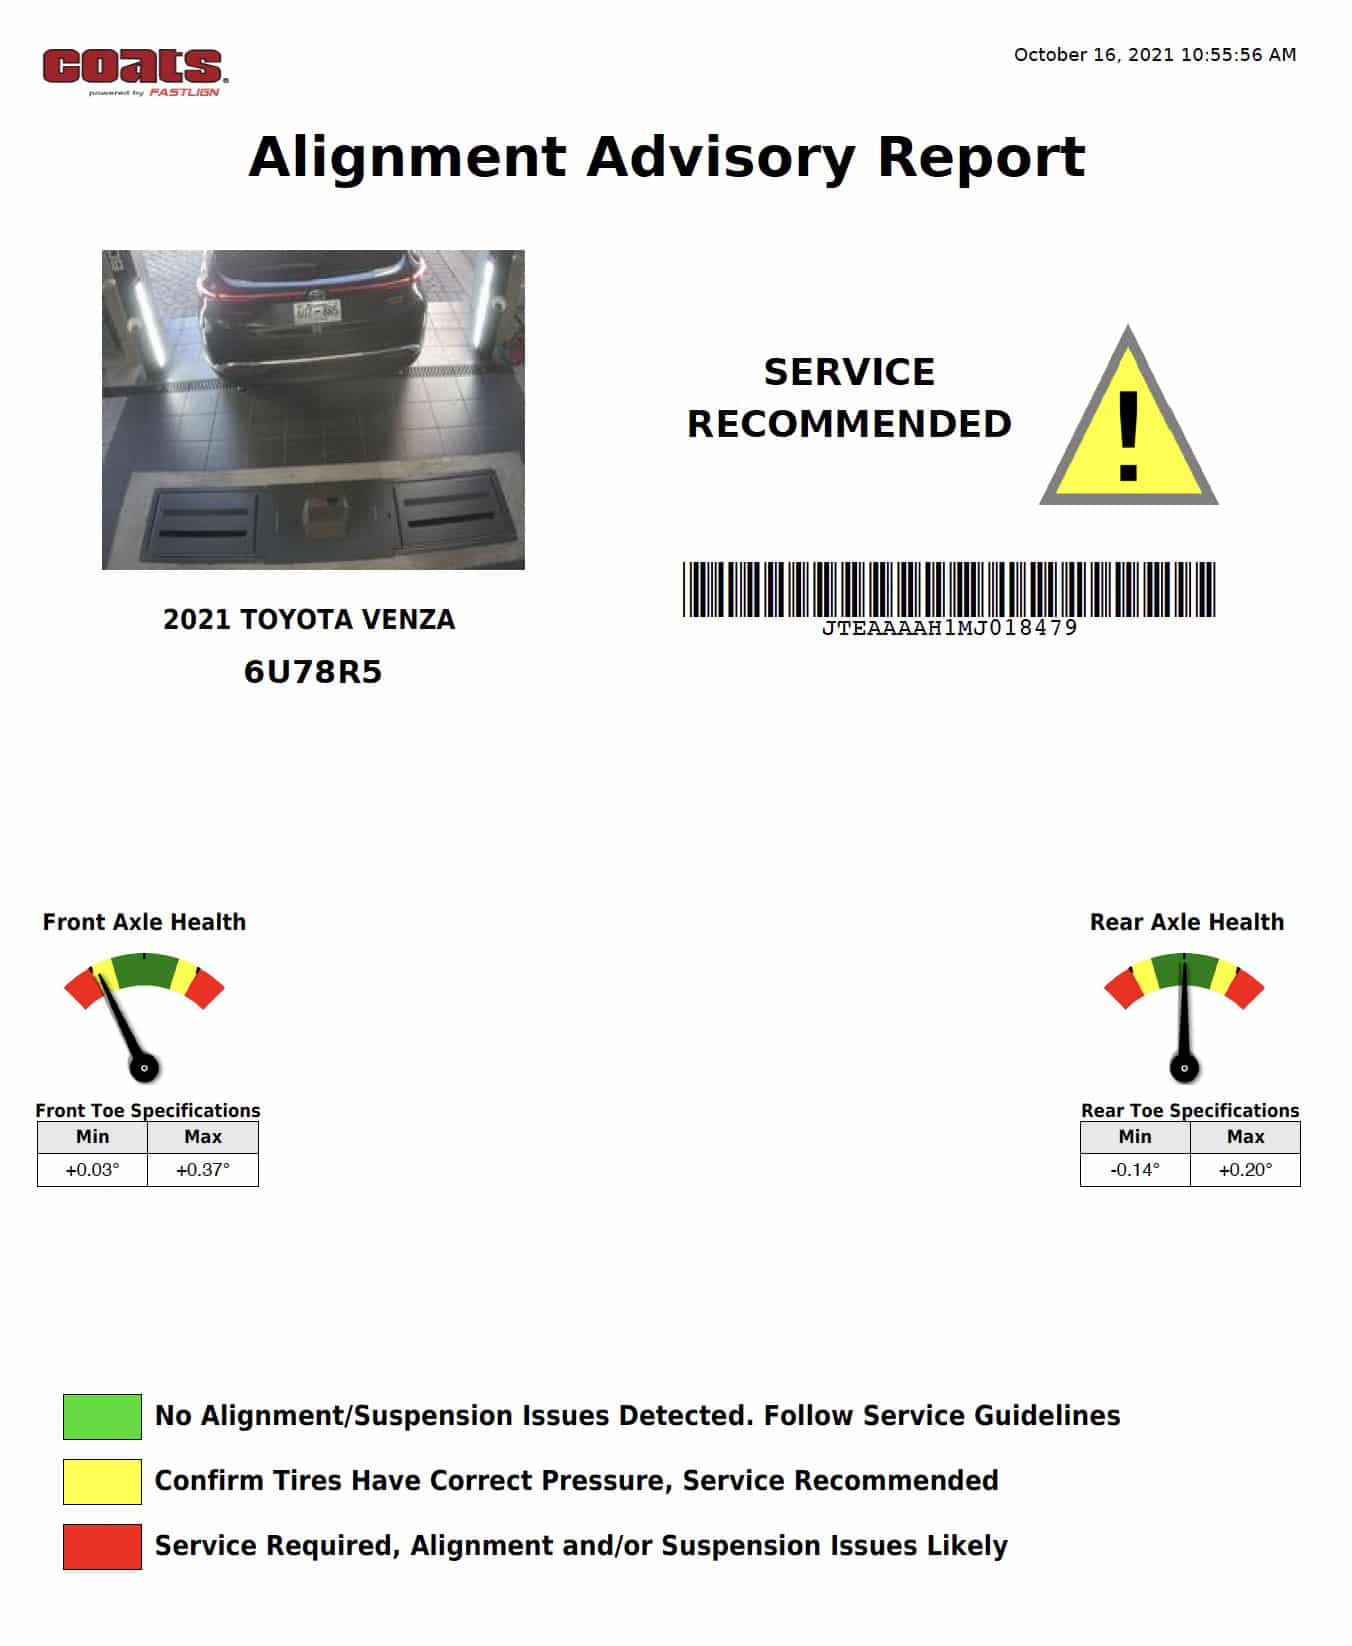 A pdf printout titled “Alignment Advisory Report” shows that the car that drove through the alignment towers have a “Service Recommended” alert. The report also shows the front and rear axle health